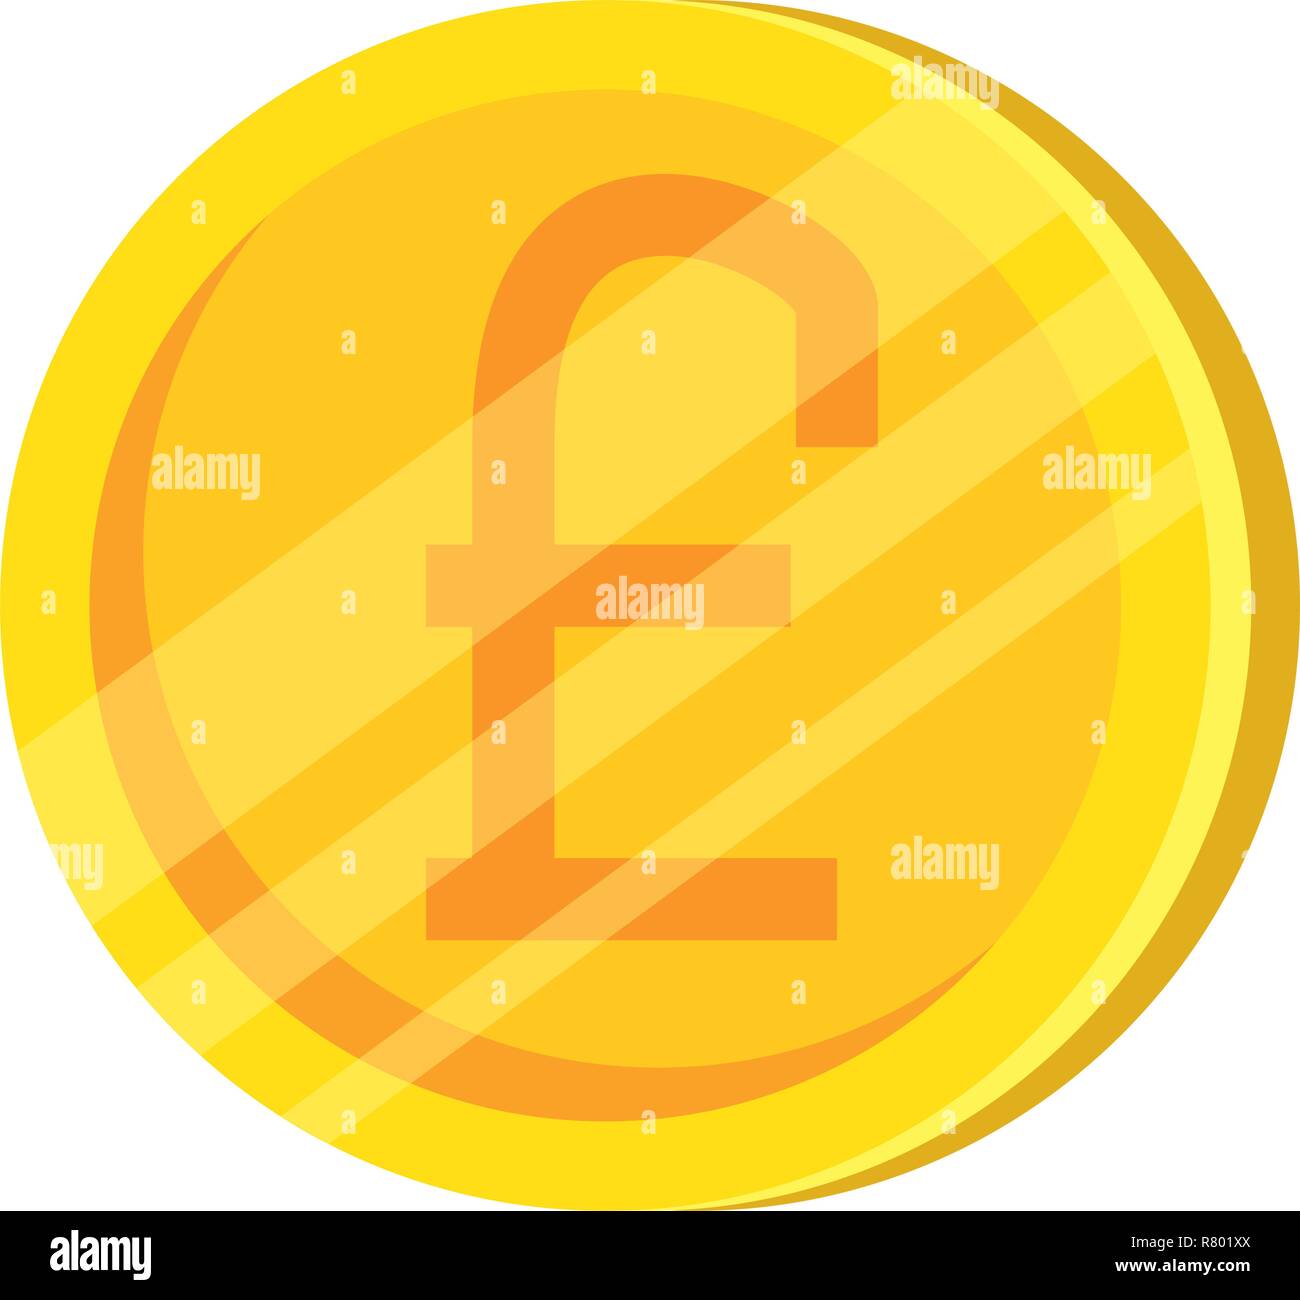 pound sterling coin icon vector illustration design Stock Vector